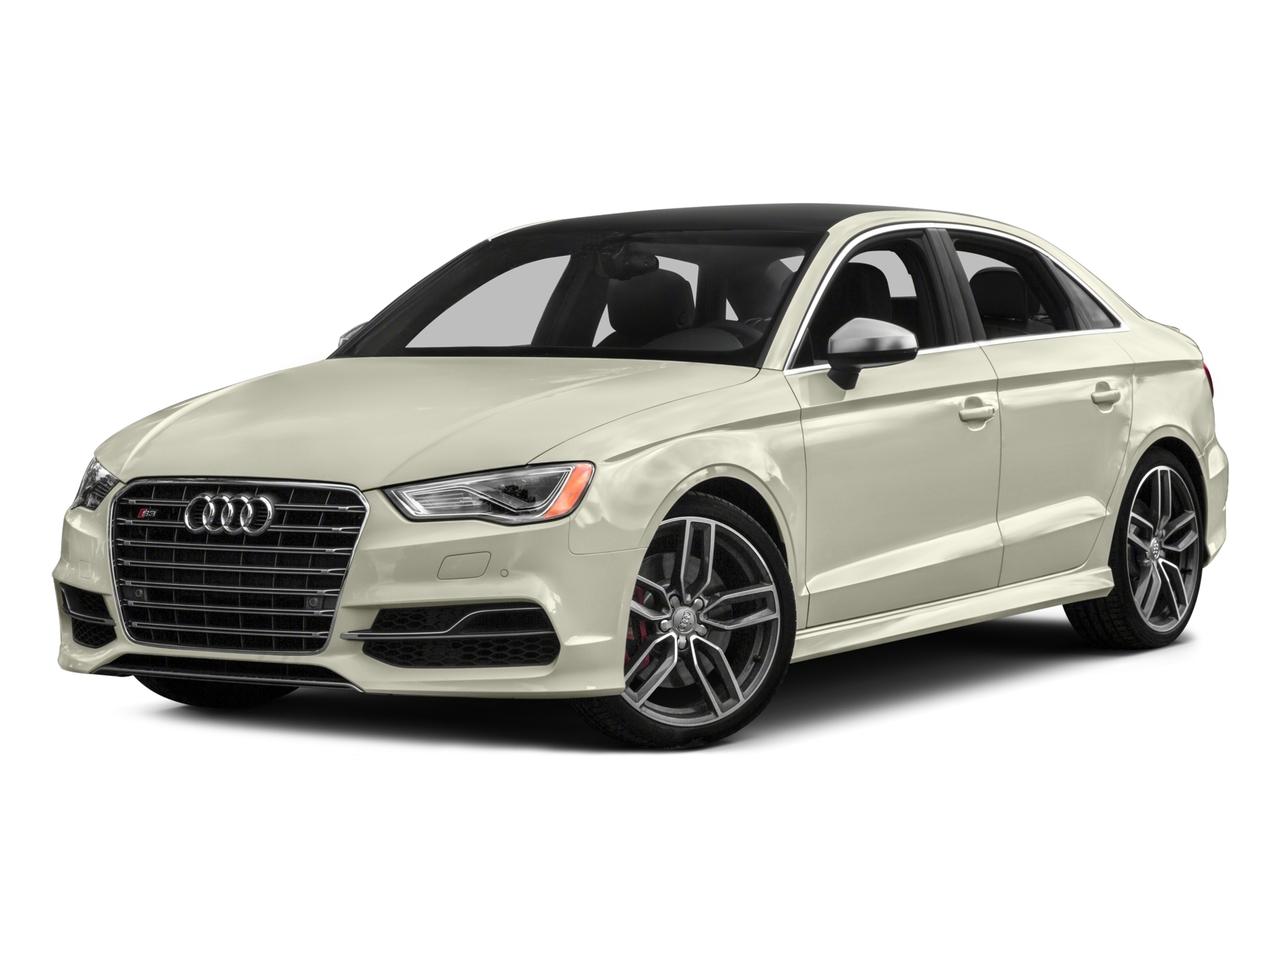 2016 Audi S3 Vehicle Photo in PORTSMOUTH, NH 03801-4196